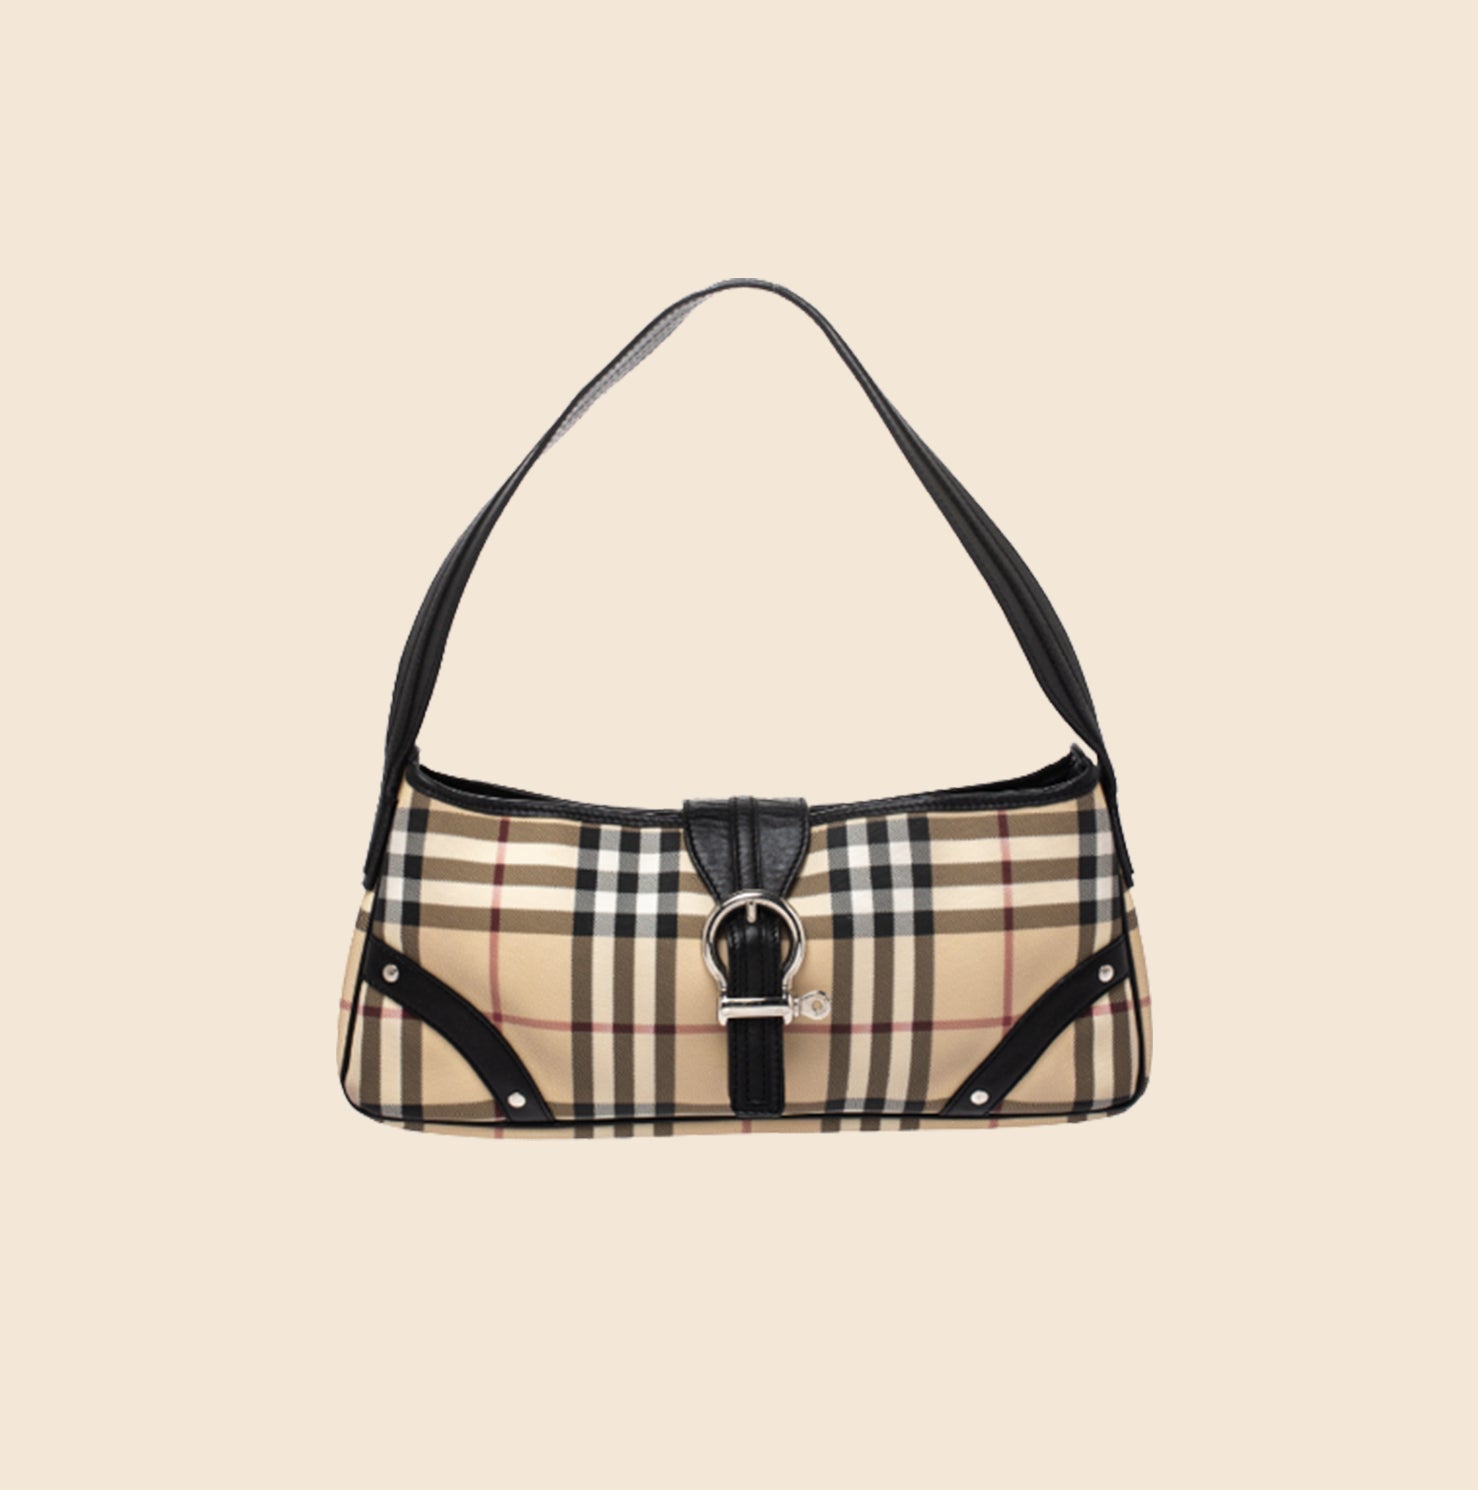 Burberry Bags Original Hotsell, SAVE 59% 